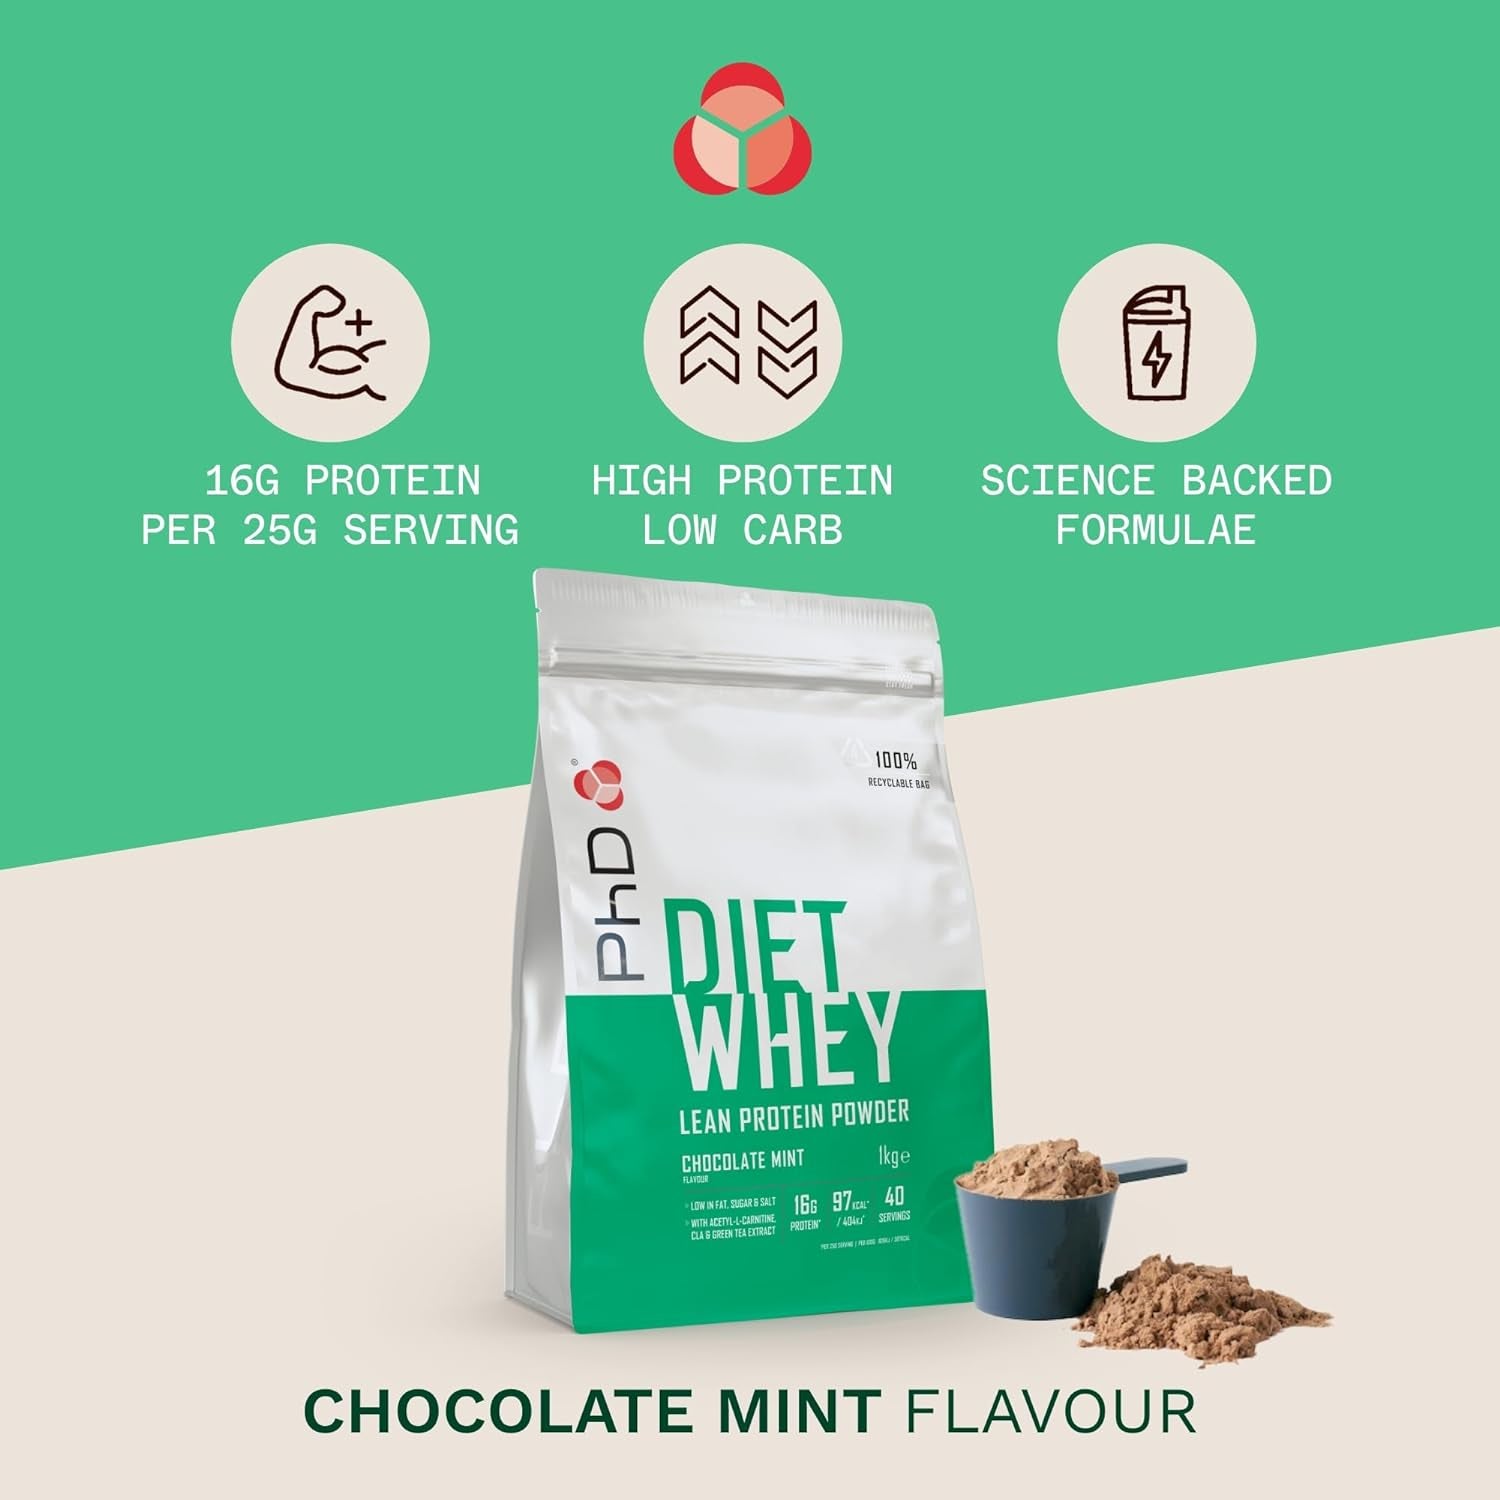 Nutrition Diet Whey Low Calorie Protein Powder, Low Carb, High Protein Lean Matrix, Chocolate Mint Diet Whey Protein Powder, High Protein, 40 Servings per 1 Kg Bag